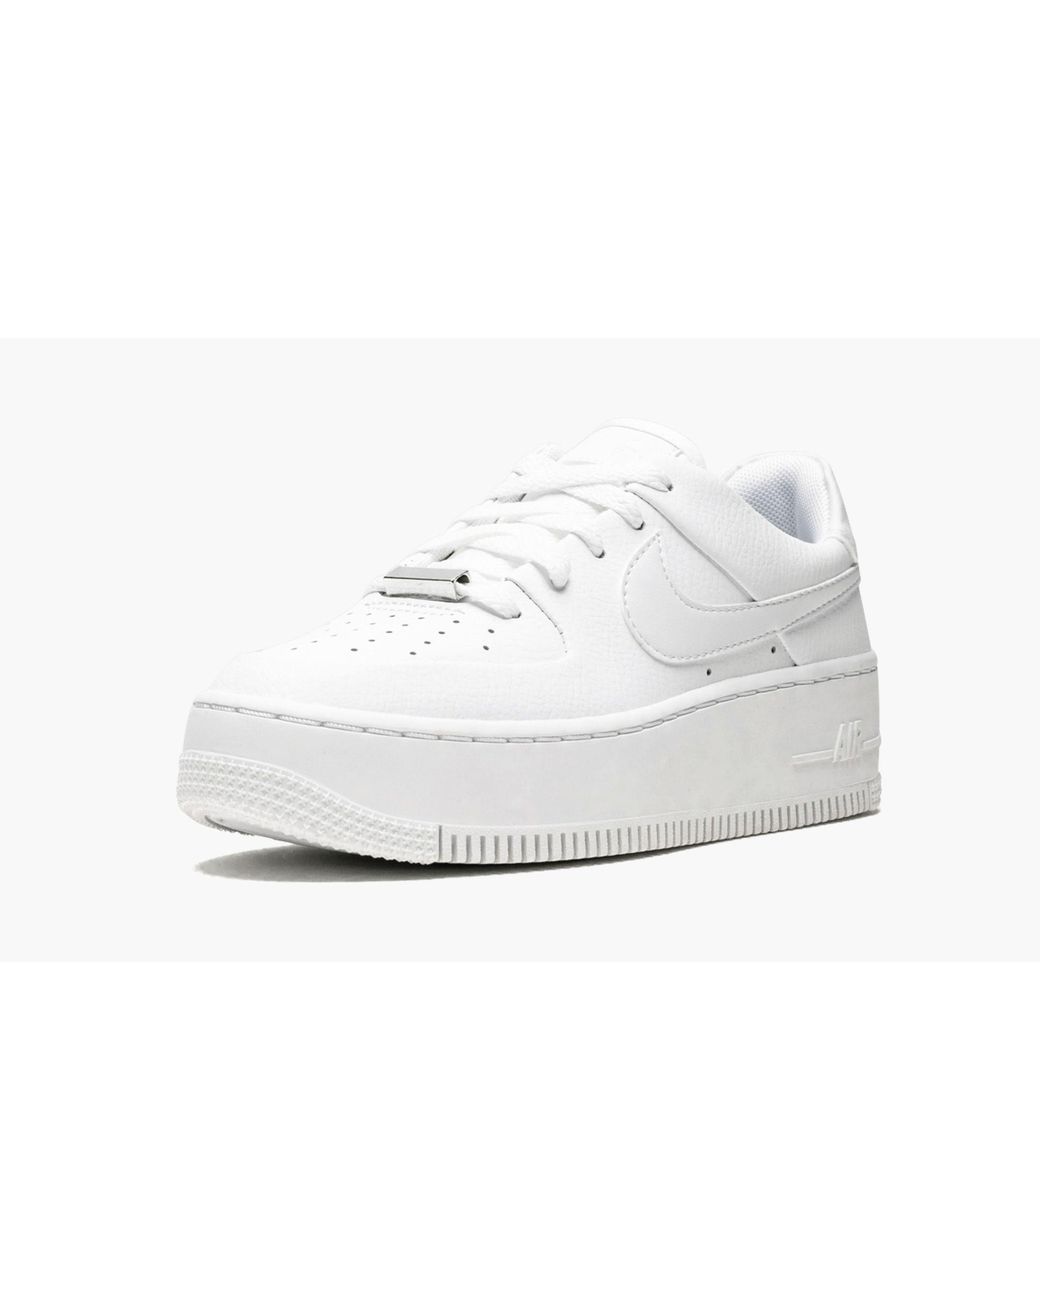 Nike Air Force 1 Sage Low "triple White" Shoes in Black | Lyst